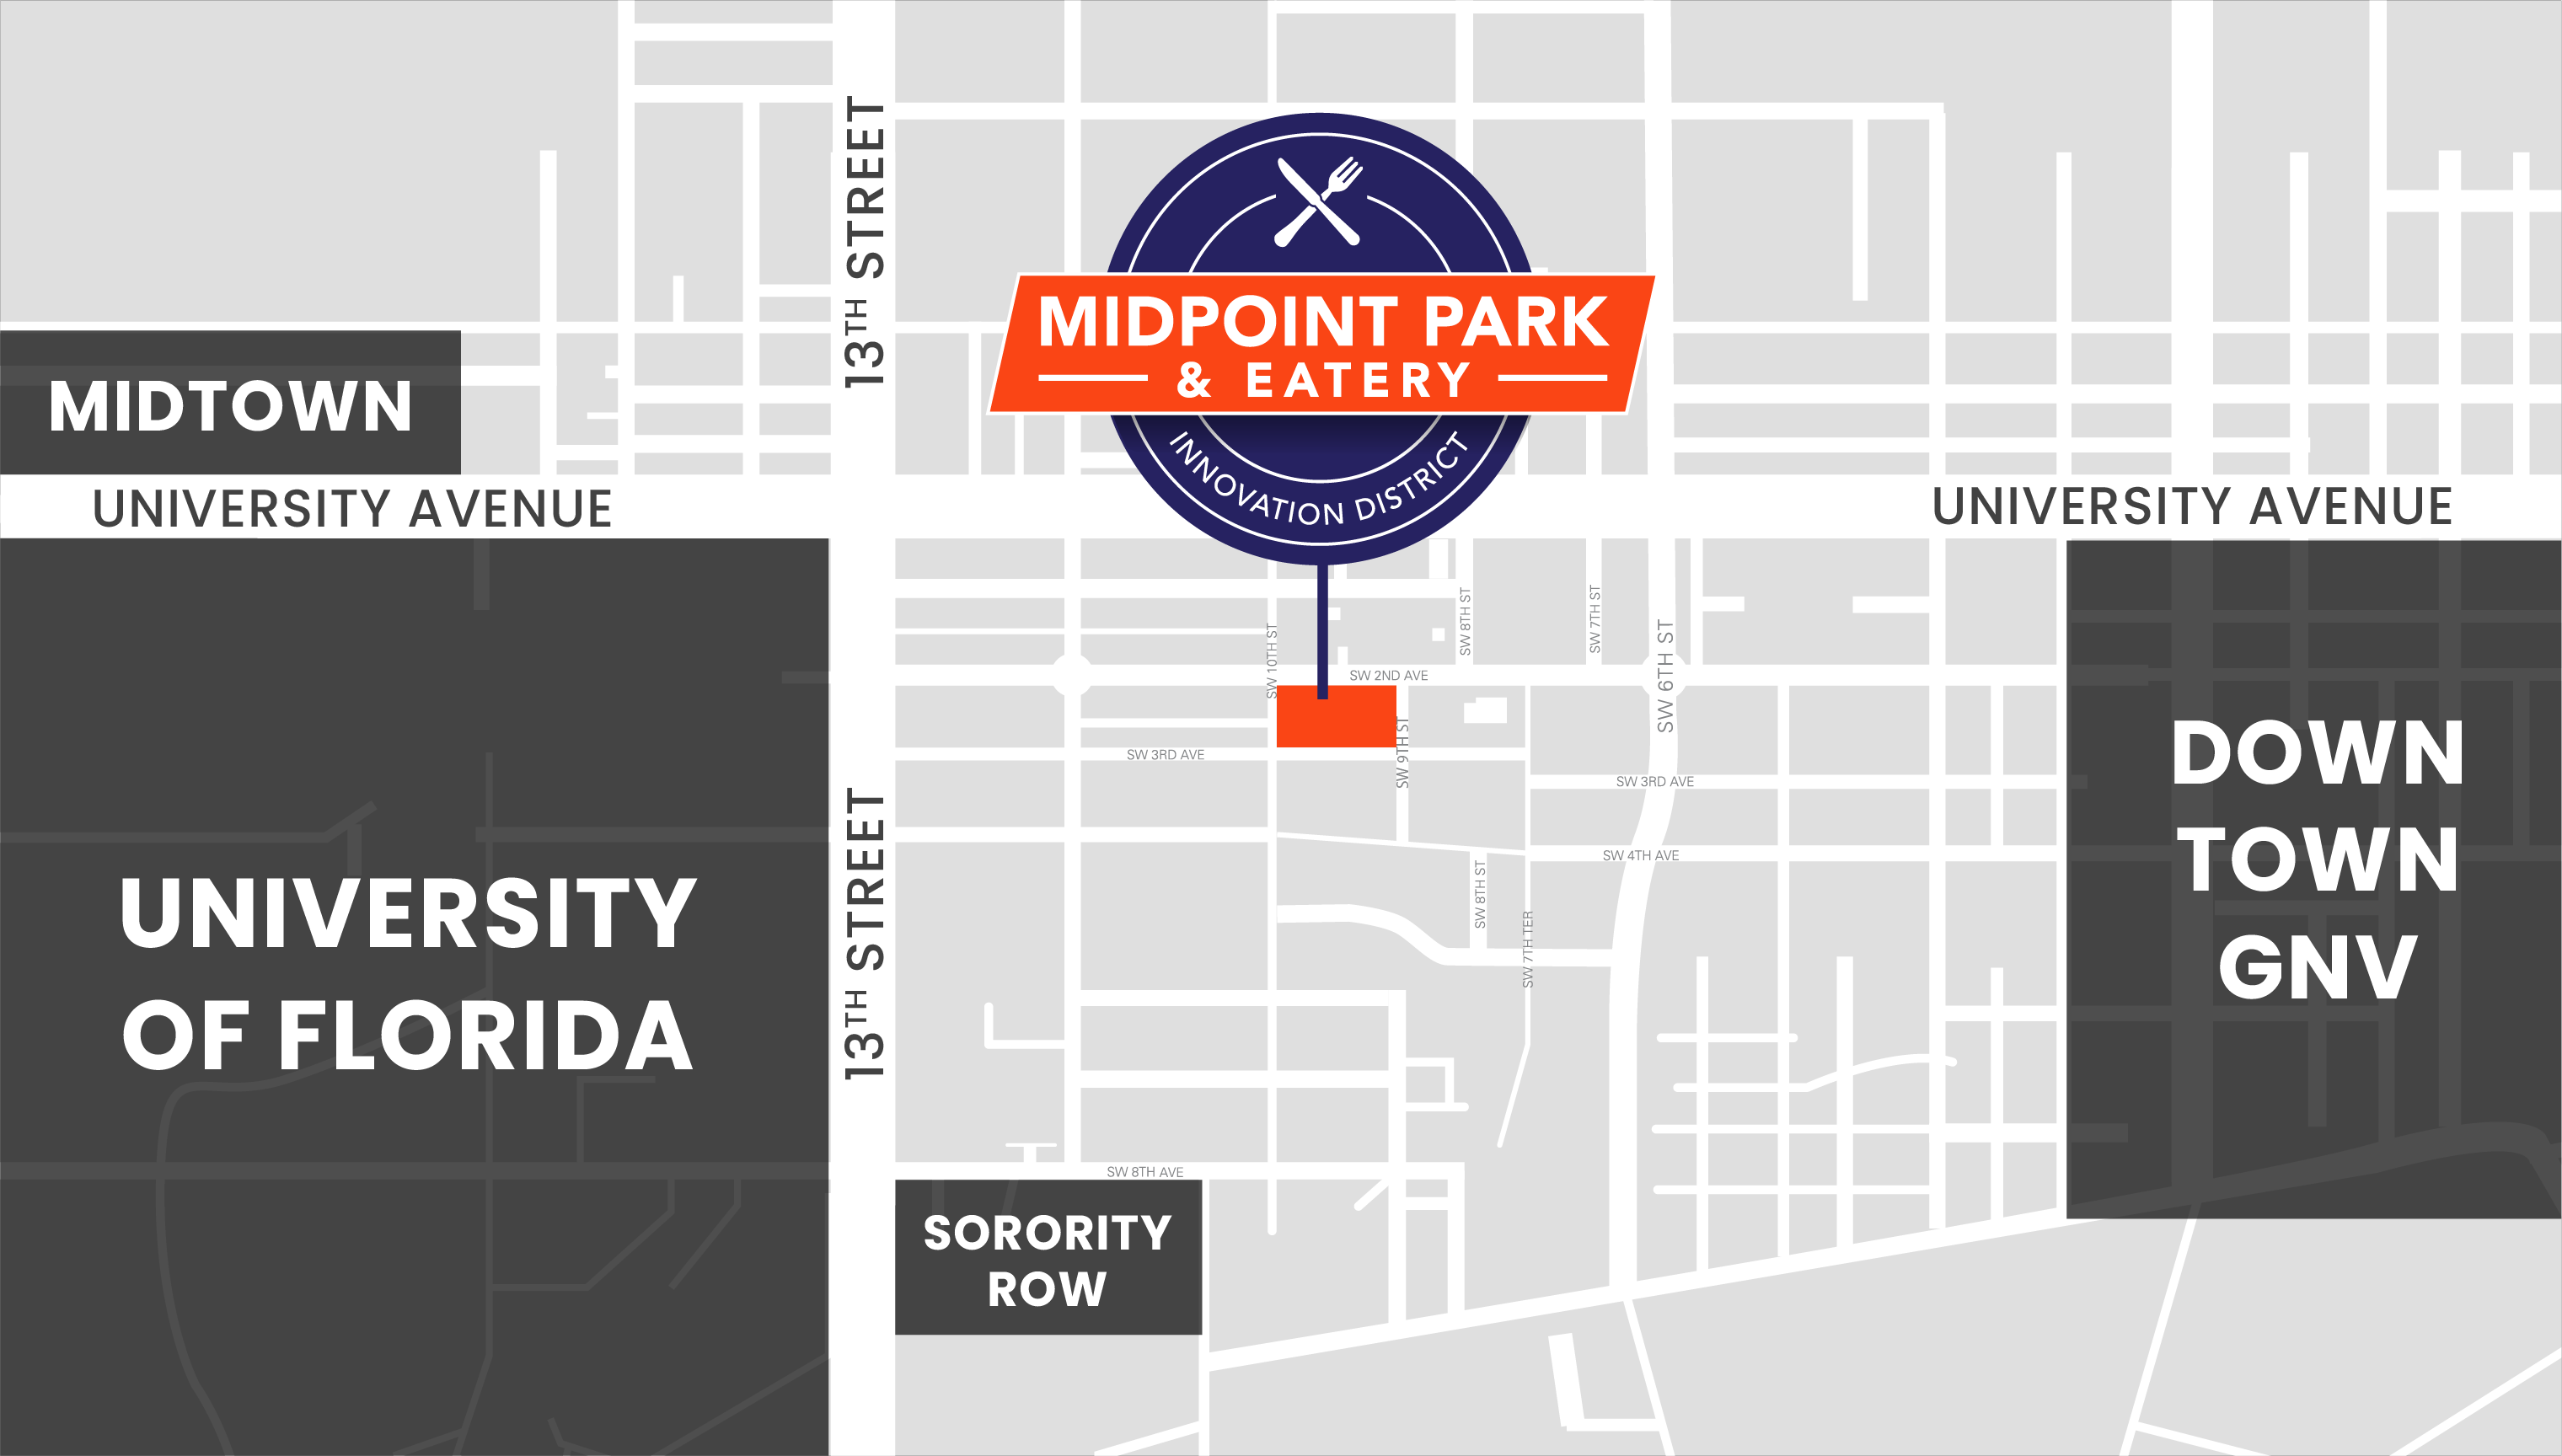 map showing that midpoint park and eatery is located in centrally between the university of florida and Downtown Gainesville, and is also just two blocks from university avenue and three blocks from 13th street